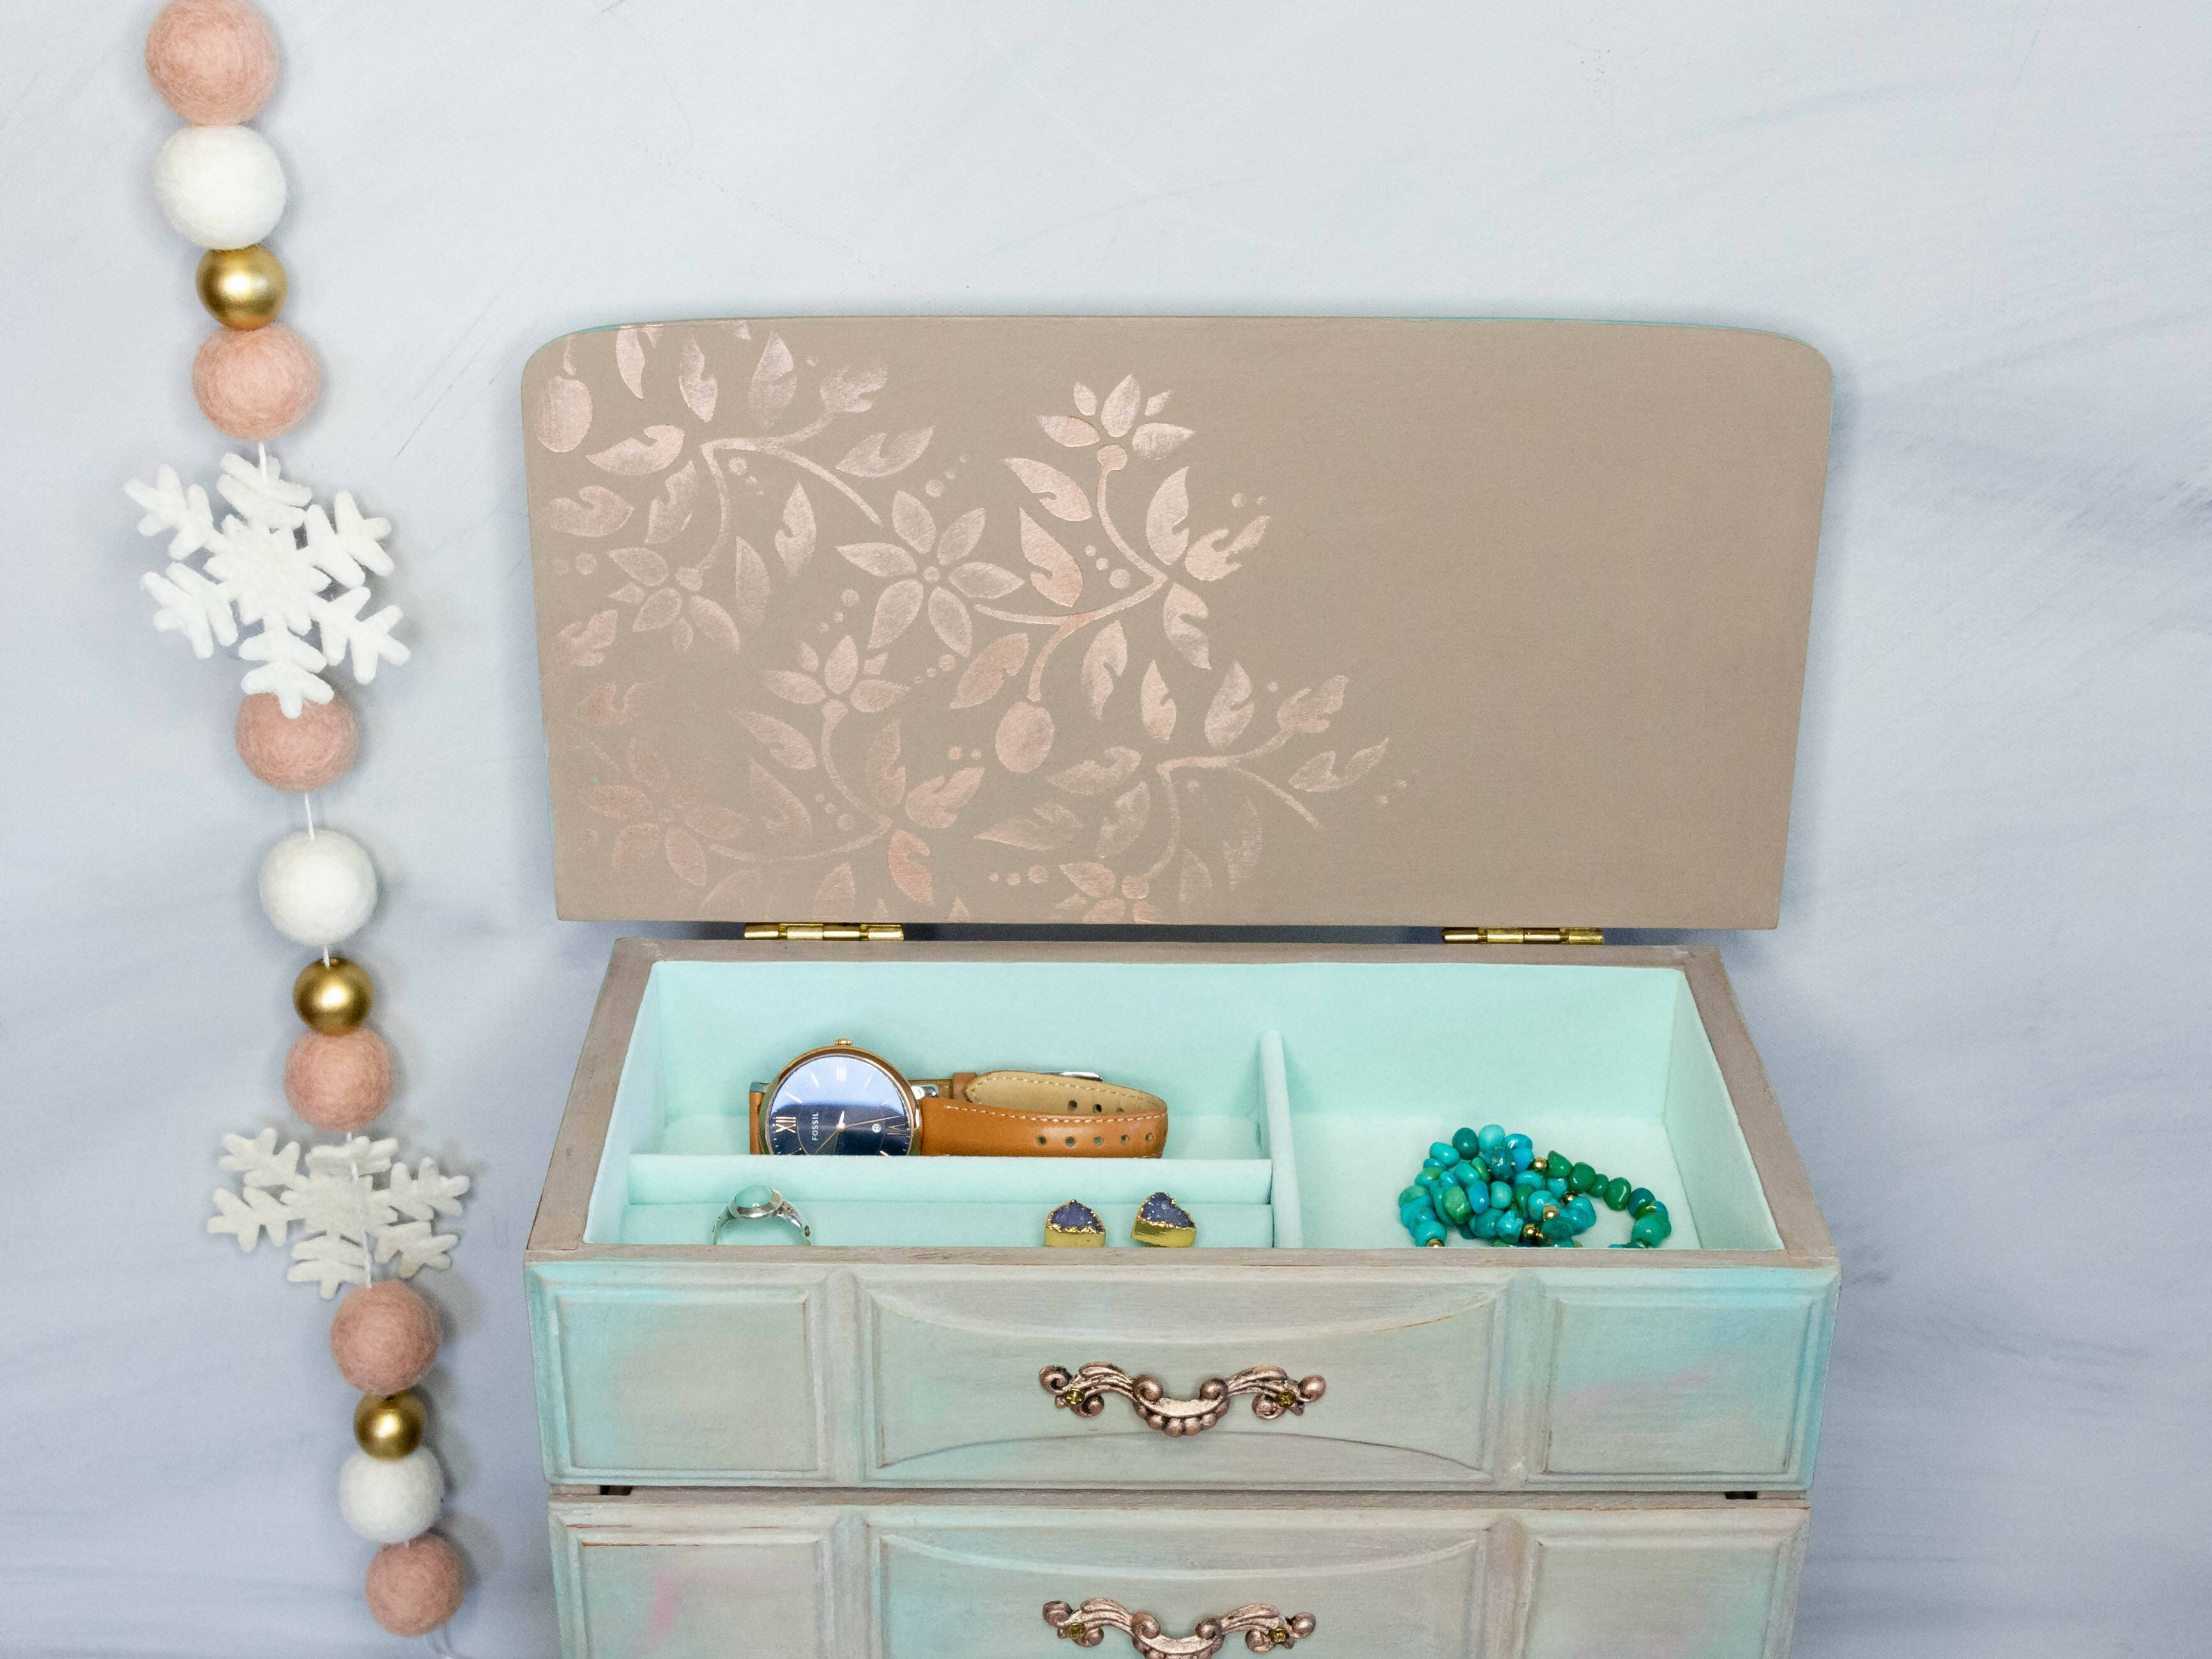 Unique Upcycled Vintage Jewelry Box, Monarch Butterfly Jewellery box -  Ottawa Artisans